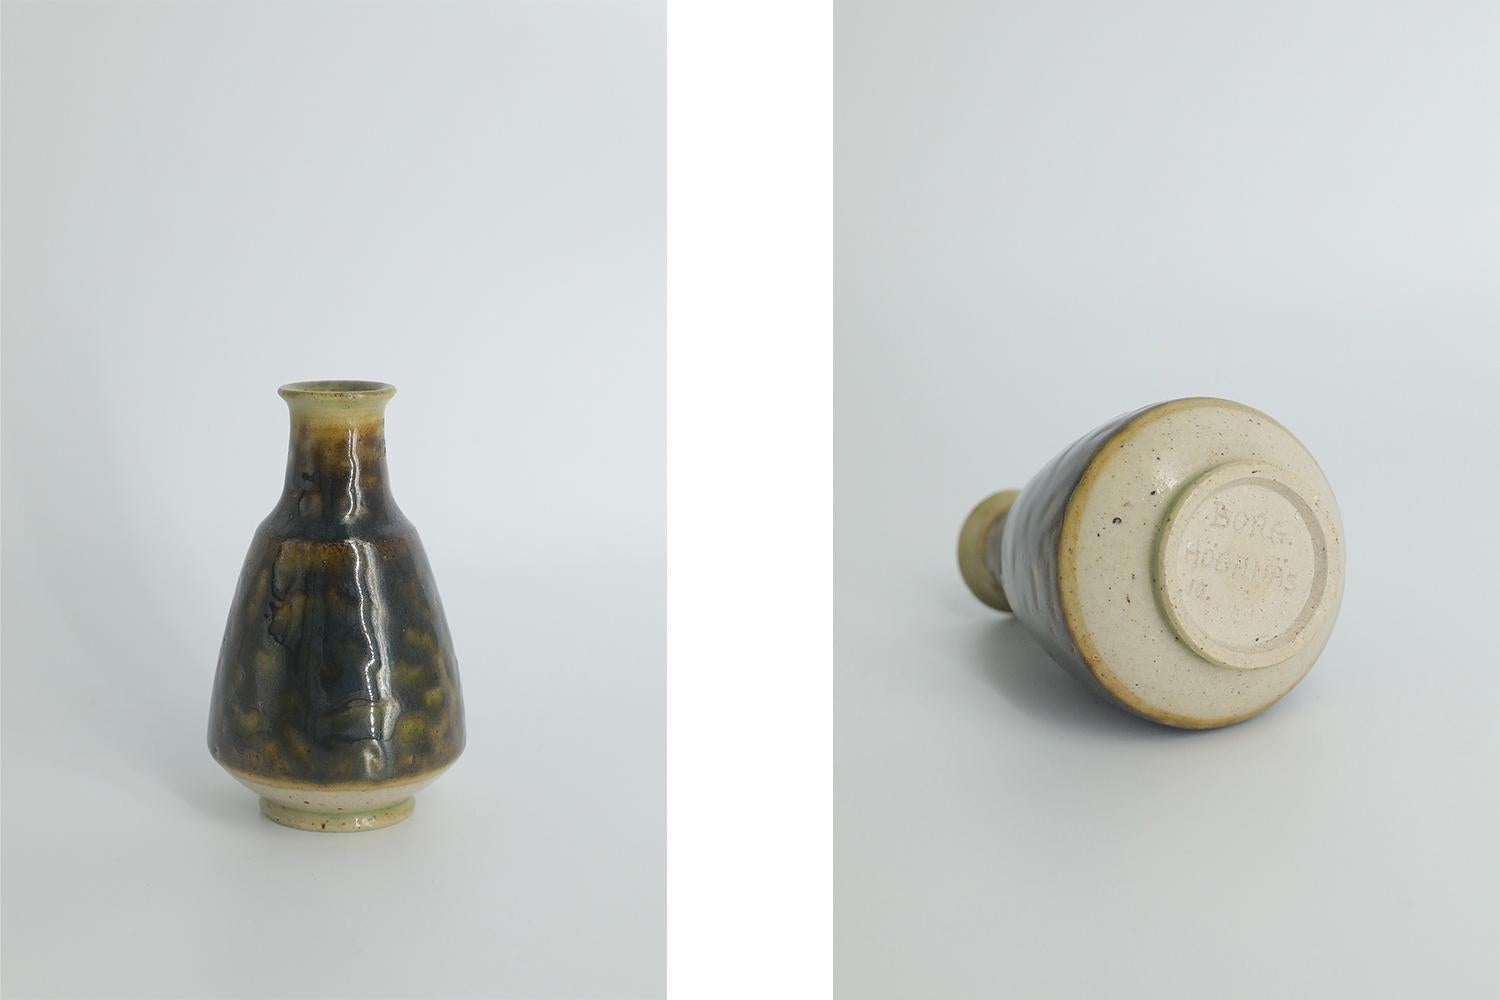 This miniature, collectible stoneware vase was designed by Gunnar Borg for the Swedish manufacture Höganäs Keramik during the 1960s. Handmade by a Master, with the utmost care and attention to details. The vase is colored brown and yellow, in an